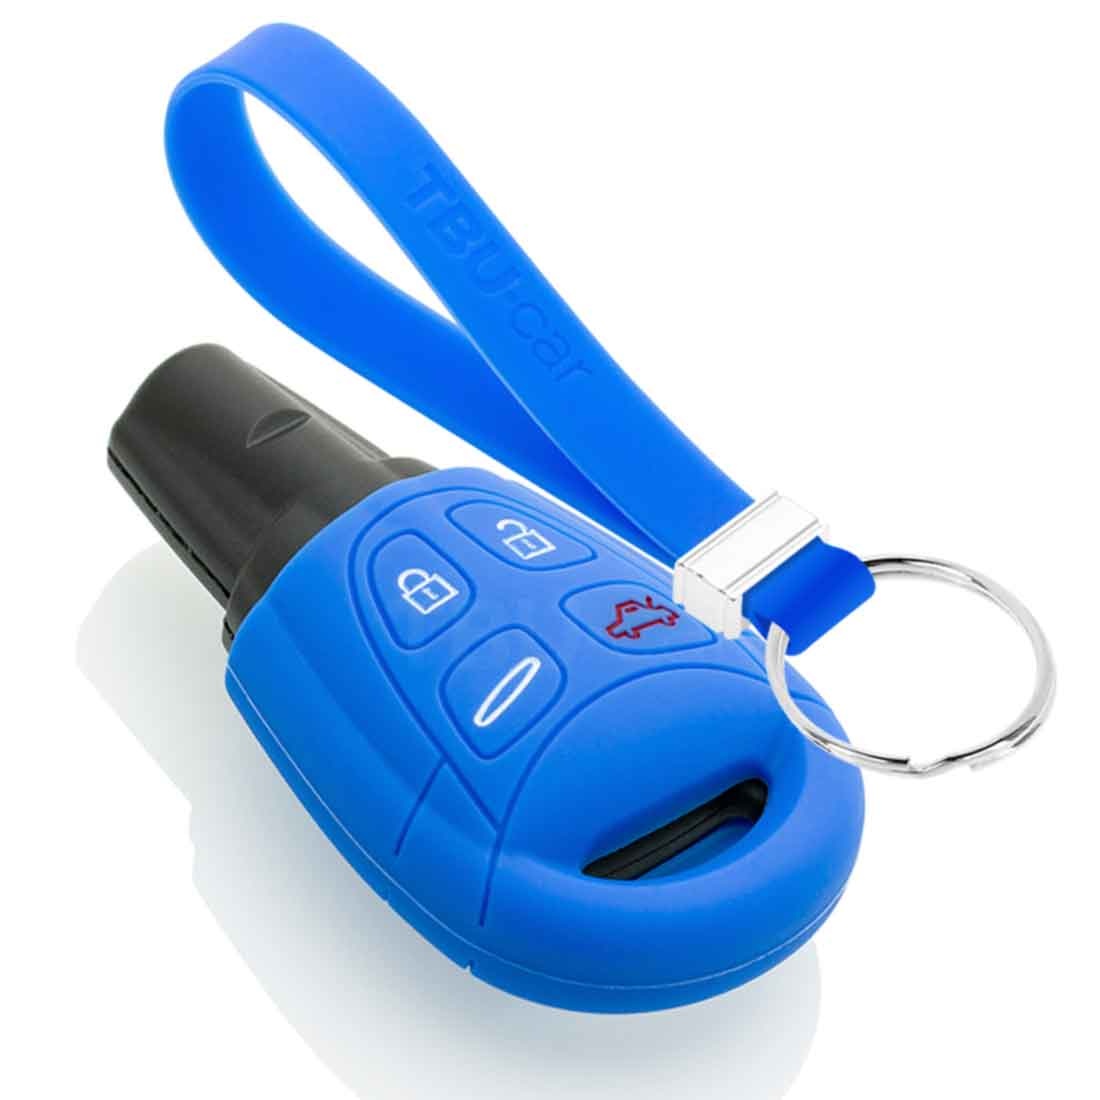 TBU car TBU car Car key cover compatible with Saab - Silicone Protective Remote Key Shell - FOB Case Cover - Blue